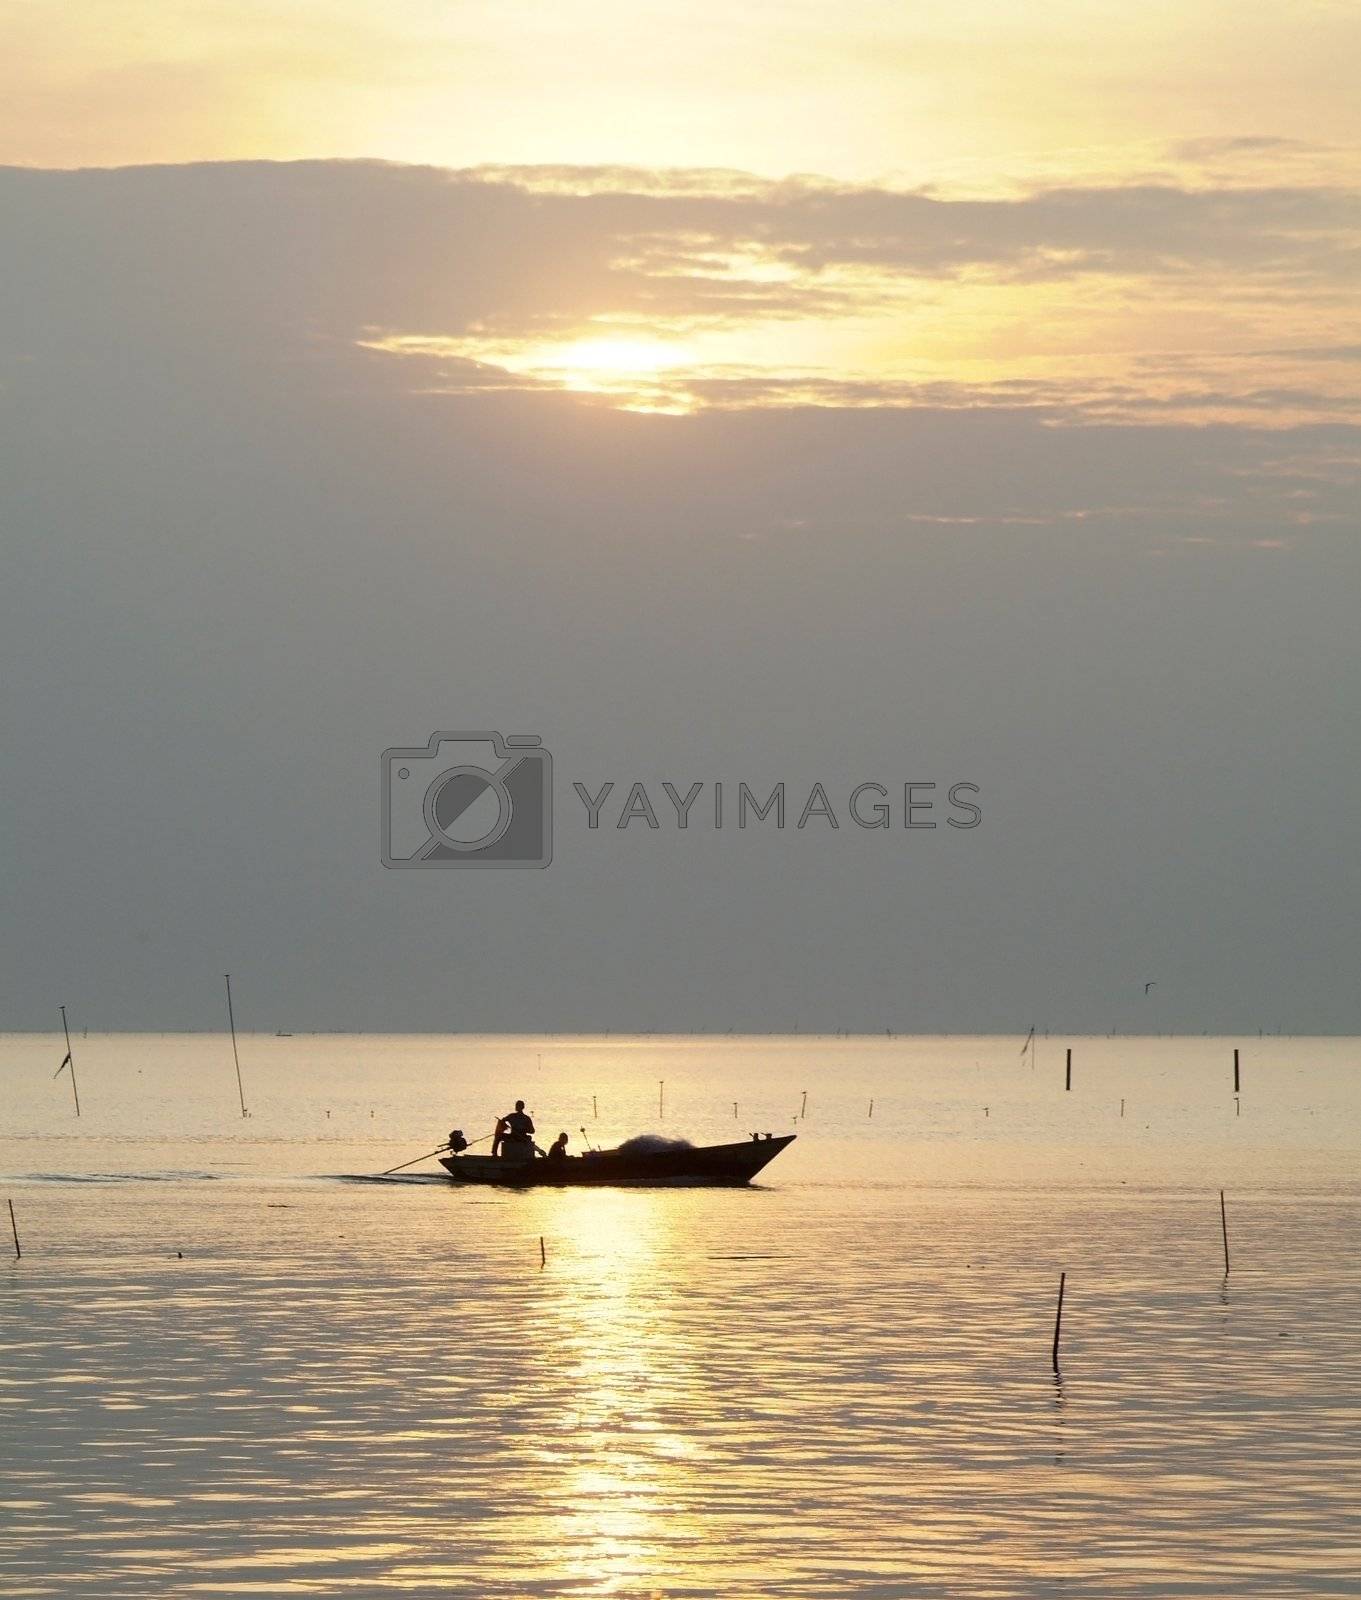 Royalty free image of Fishing boat at sunset by epixx